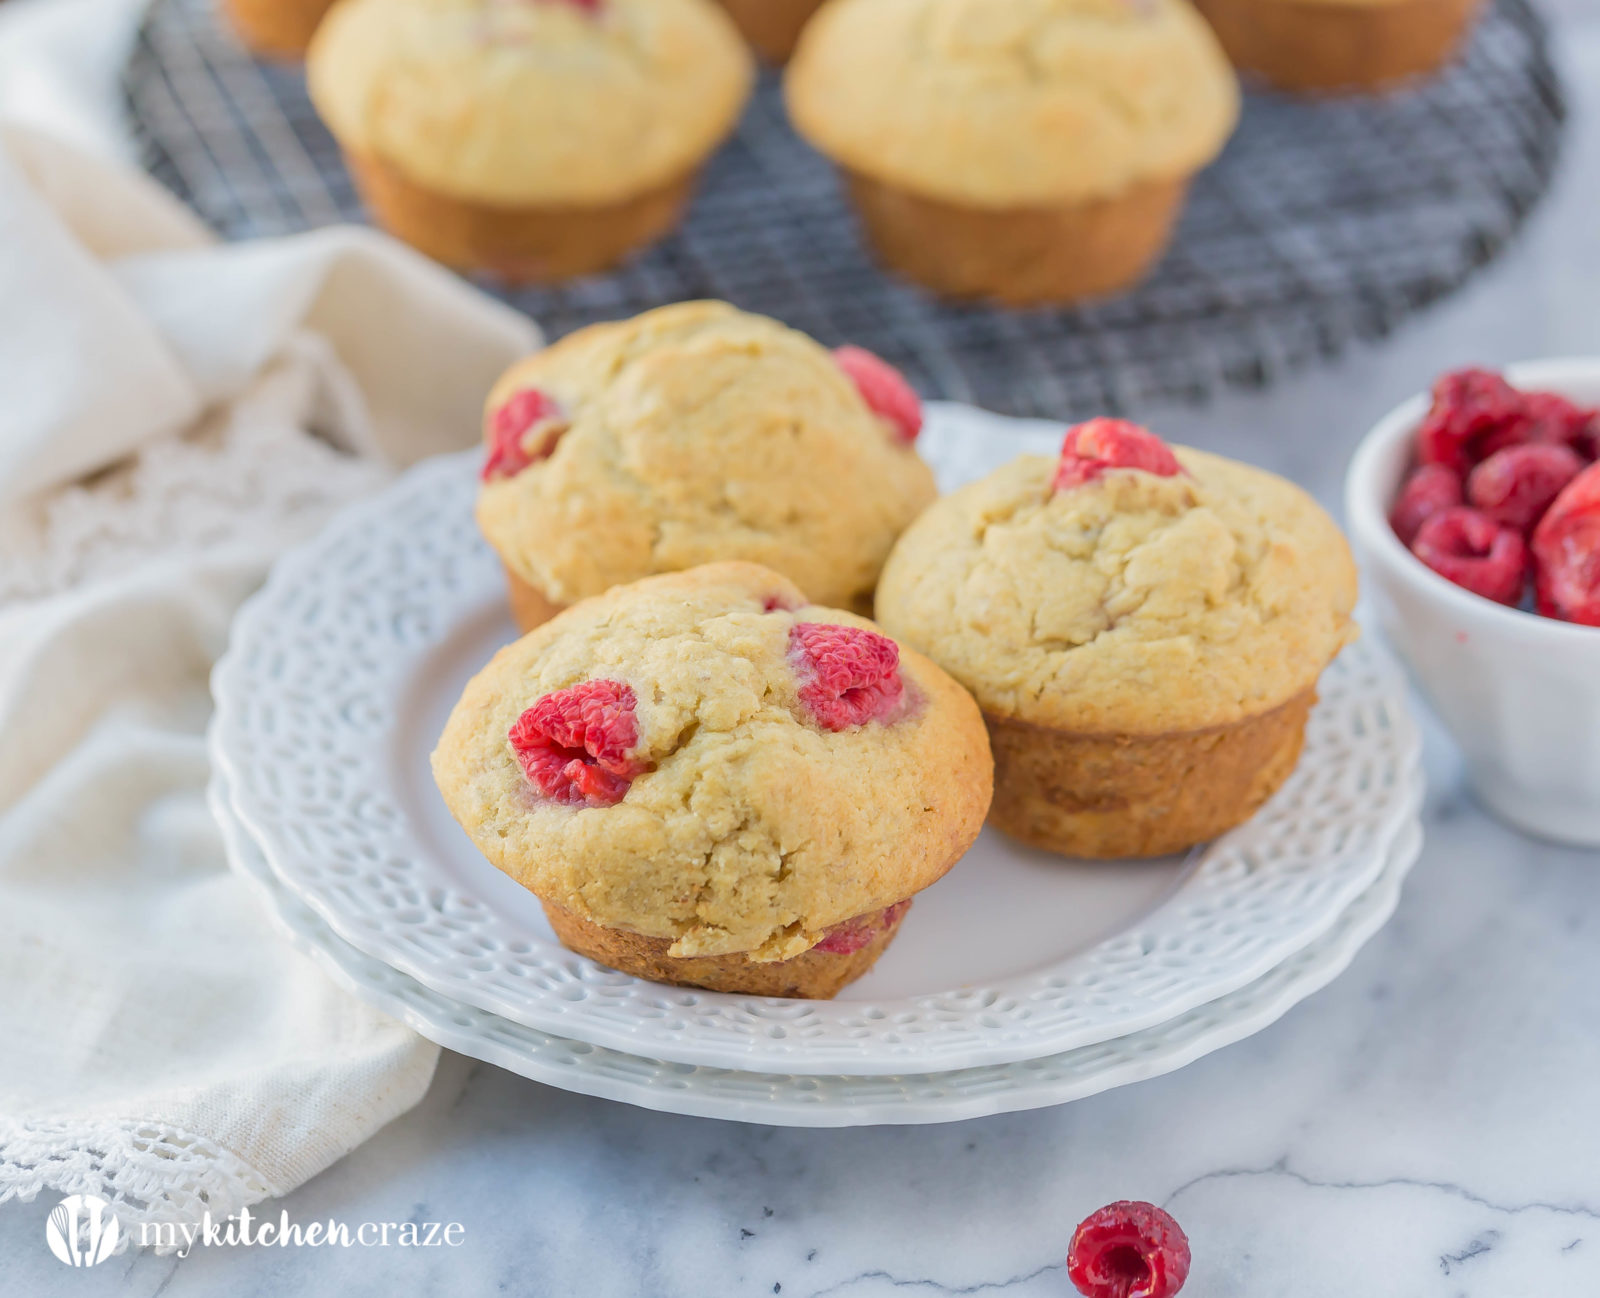 Raspberry Banana Muffins ~ Do you have some ripe bananas and fresh raspberries sitting around? Then you need to make these Raspberry Banana Muffins. Moist and all the right flavors.